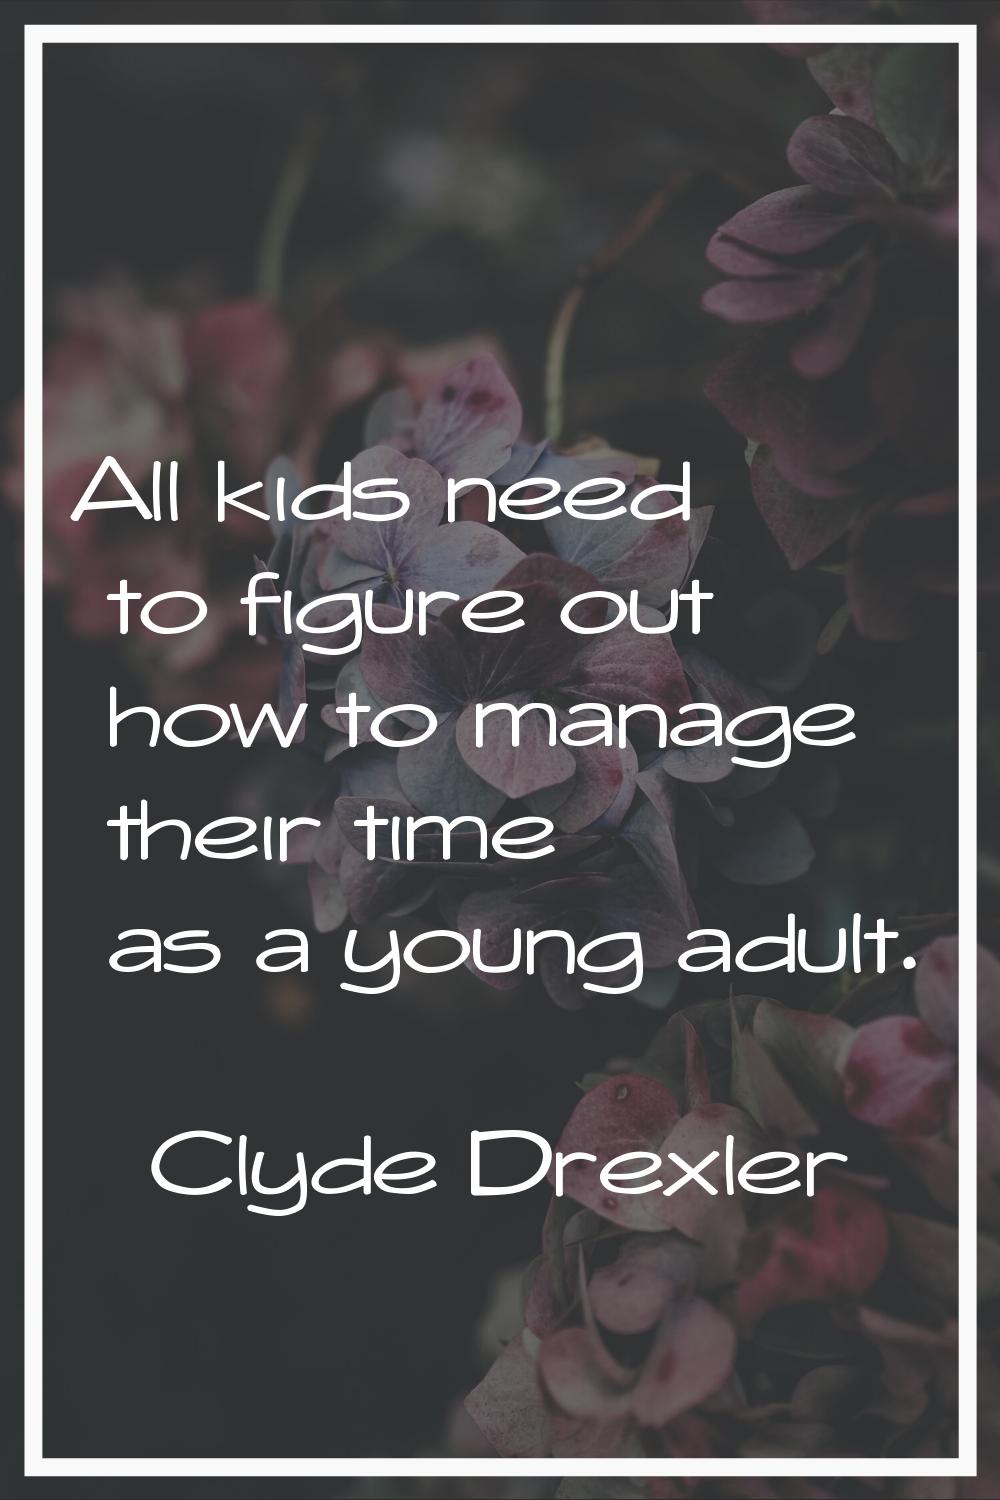 All kids need to figure out how to manage their time as a young adult.